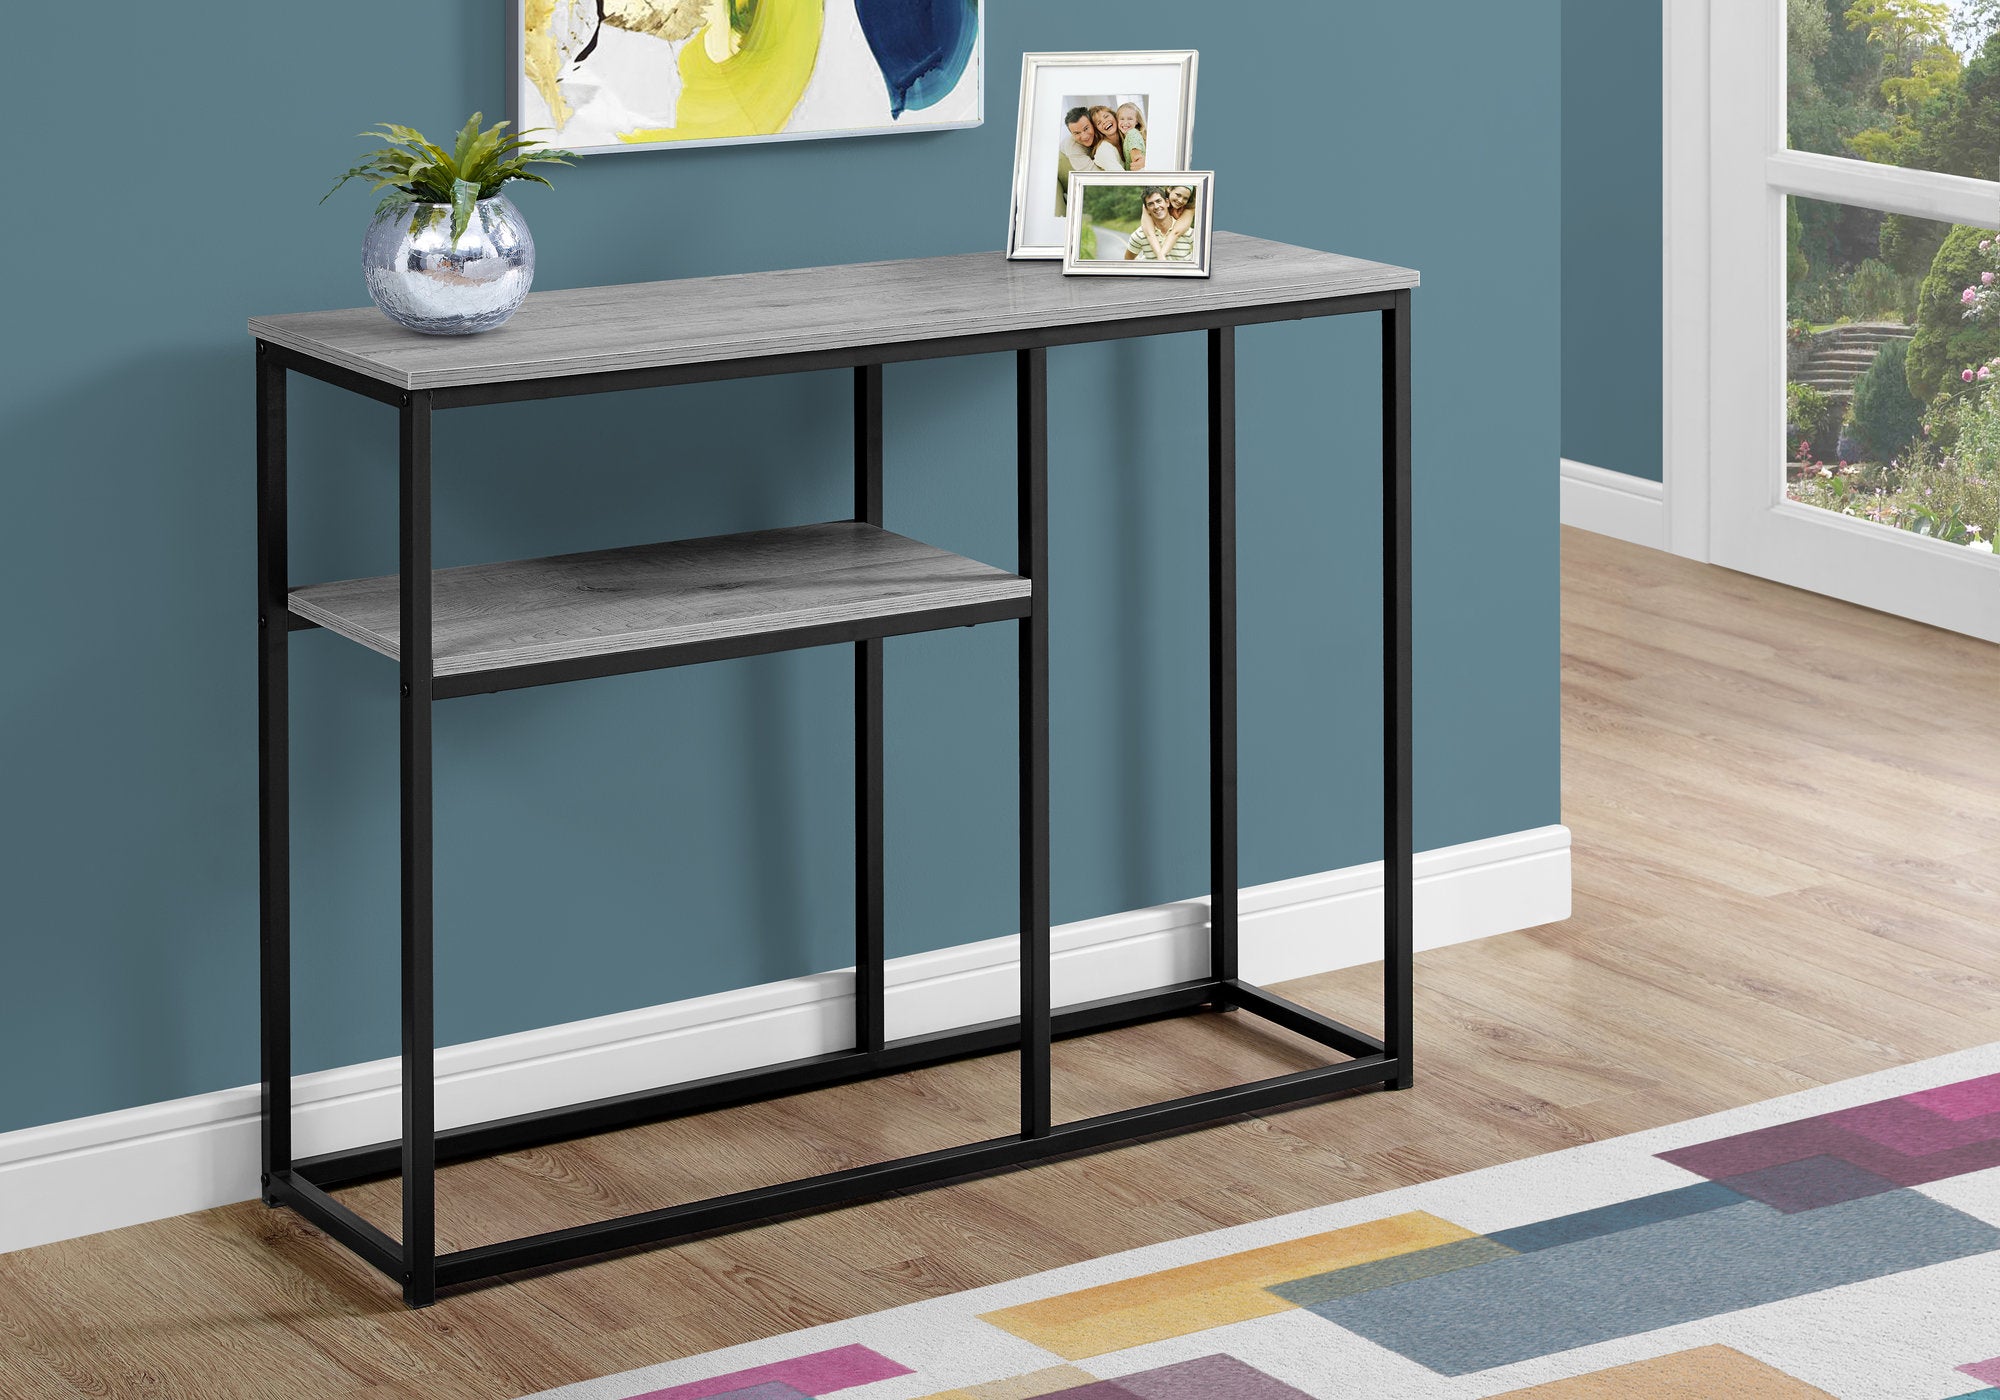 I 3514 - ACCENT TABLE - 42"L / GREY / BLACK METAL HALL CONSOLE BY MONARCH SPECIALTIES INC